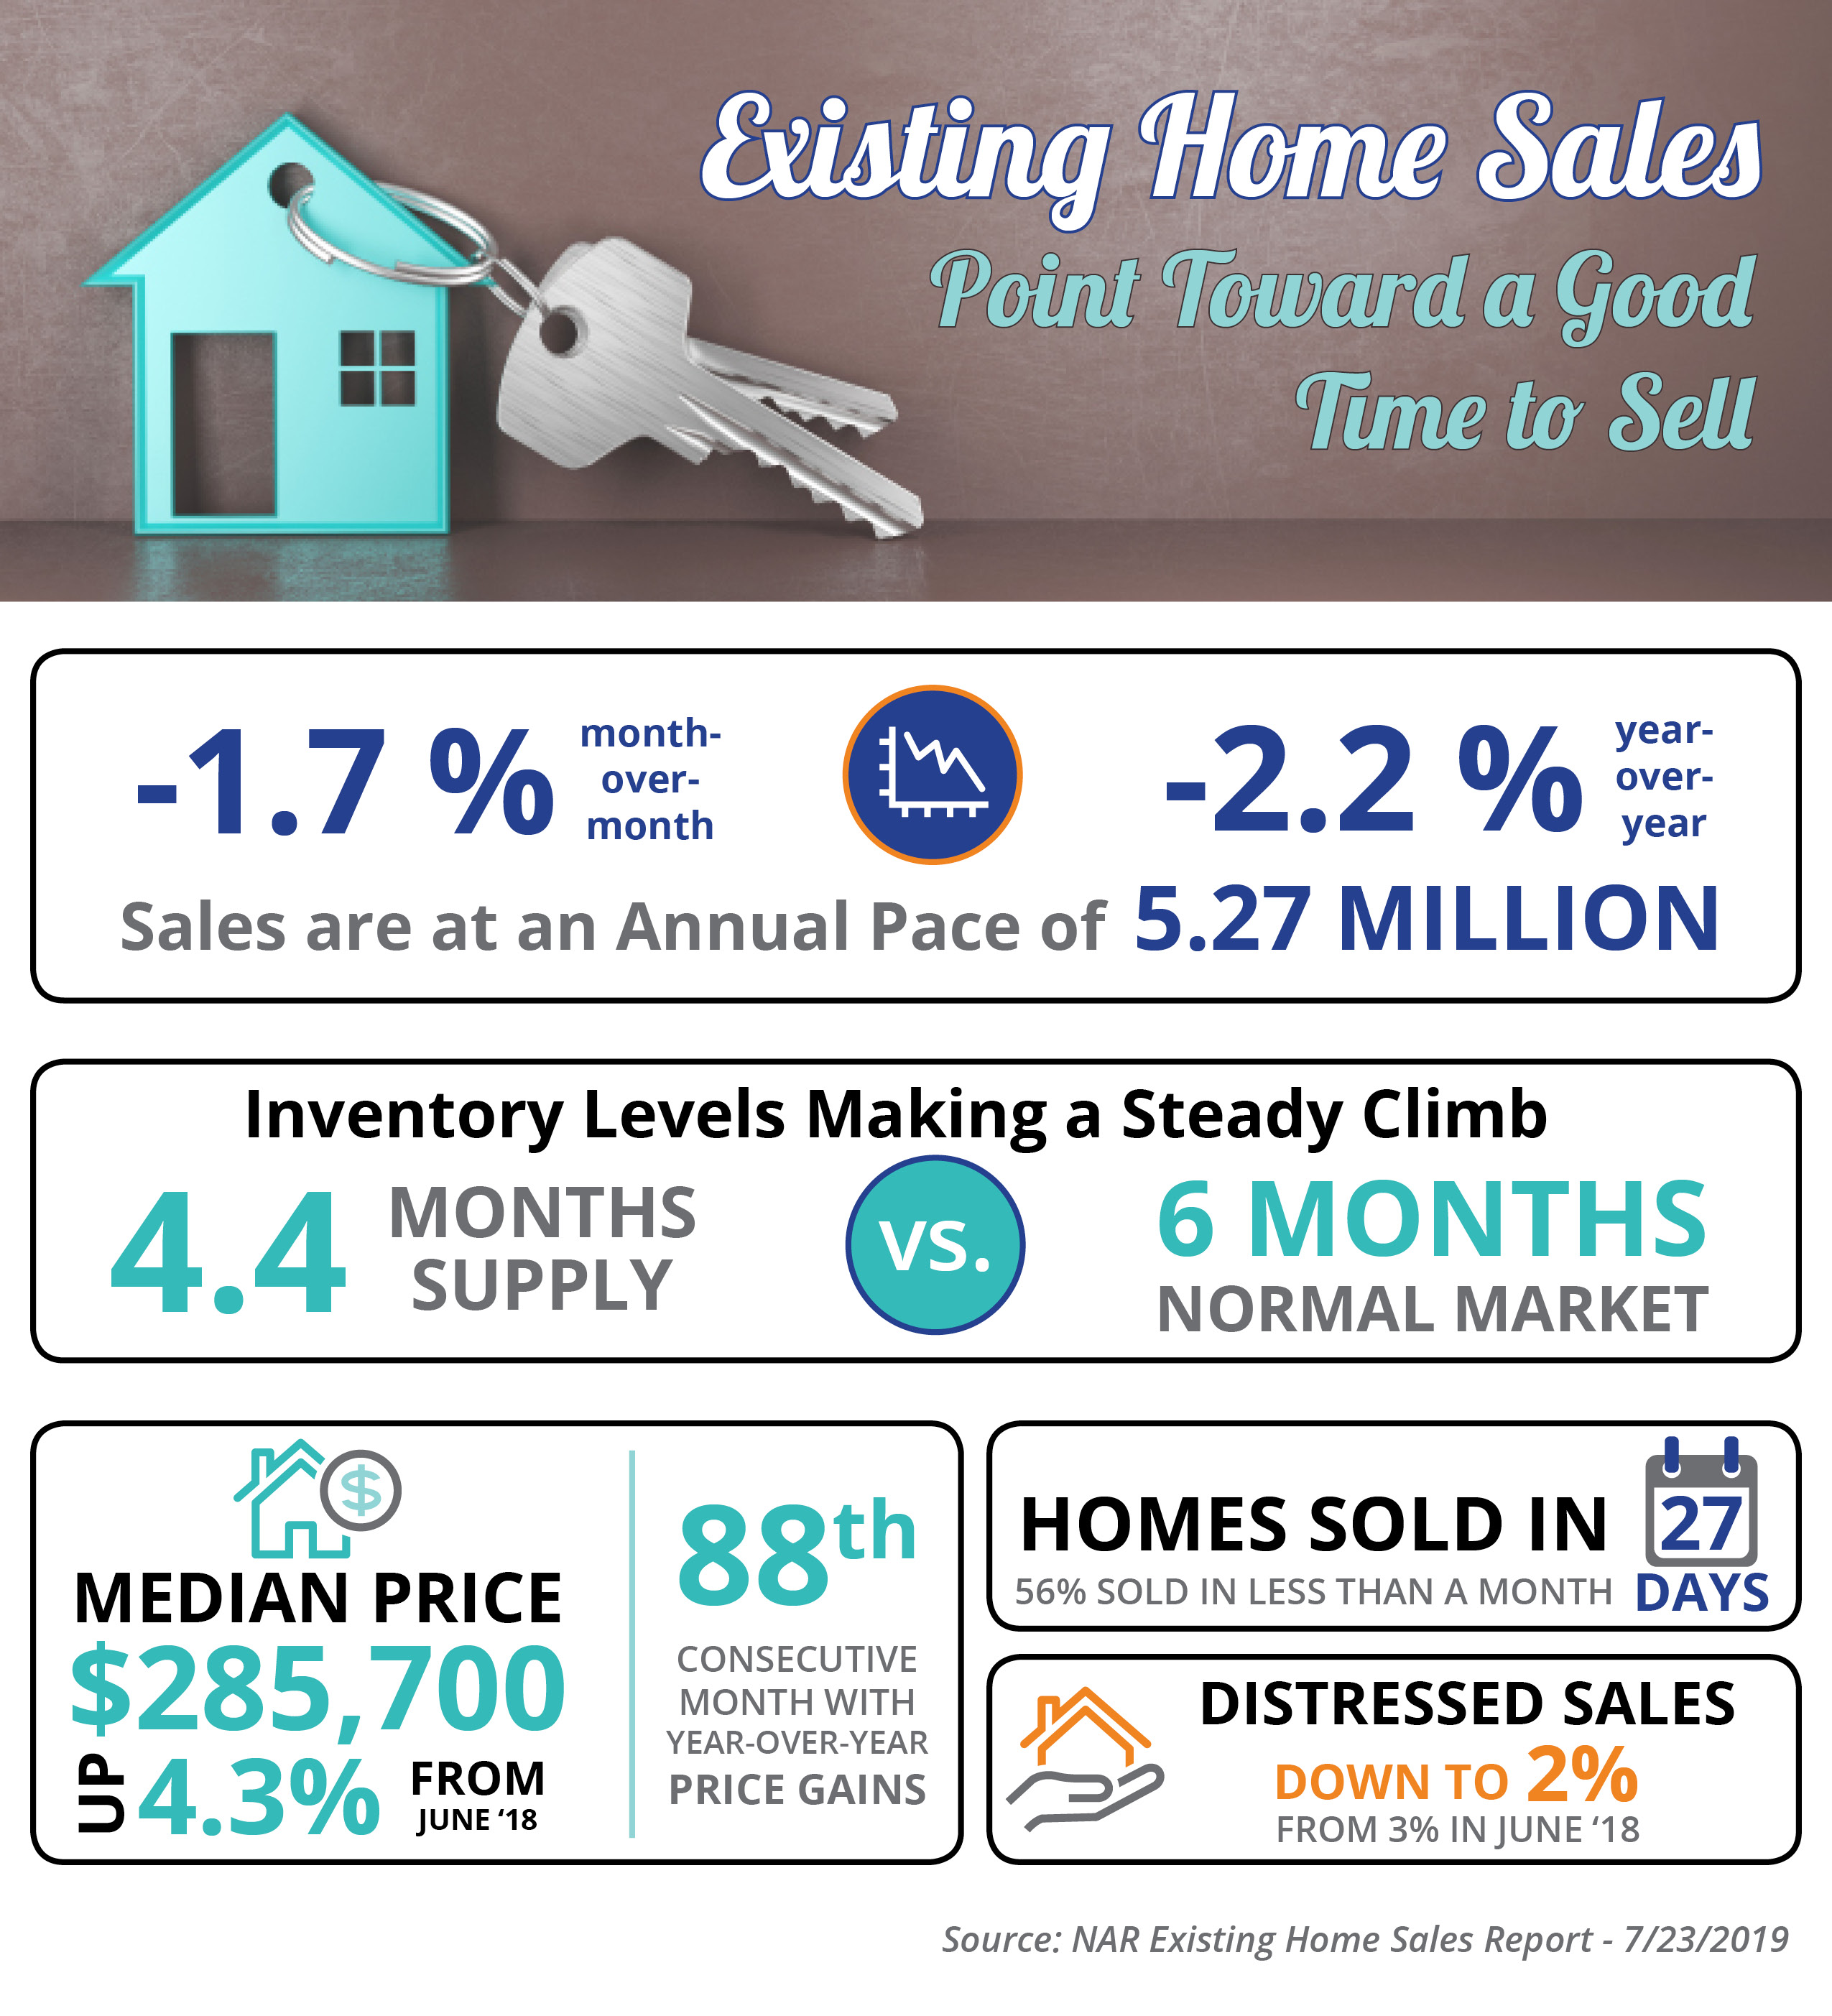 Existing Home Sales Point Toward a Good Time to Sell [INFOGRAPHIC] | Simplifying The Market